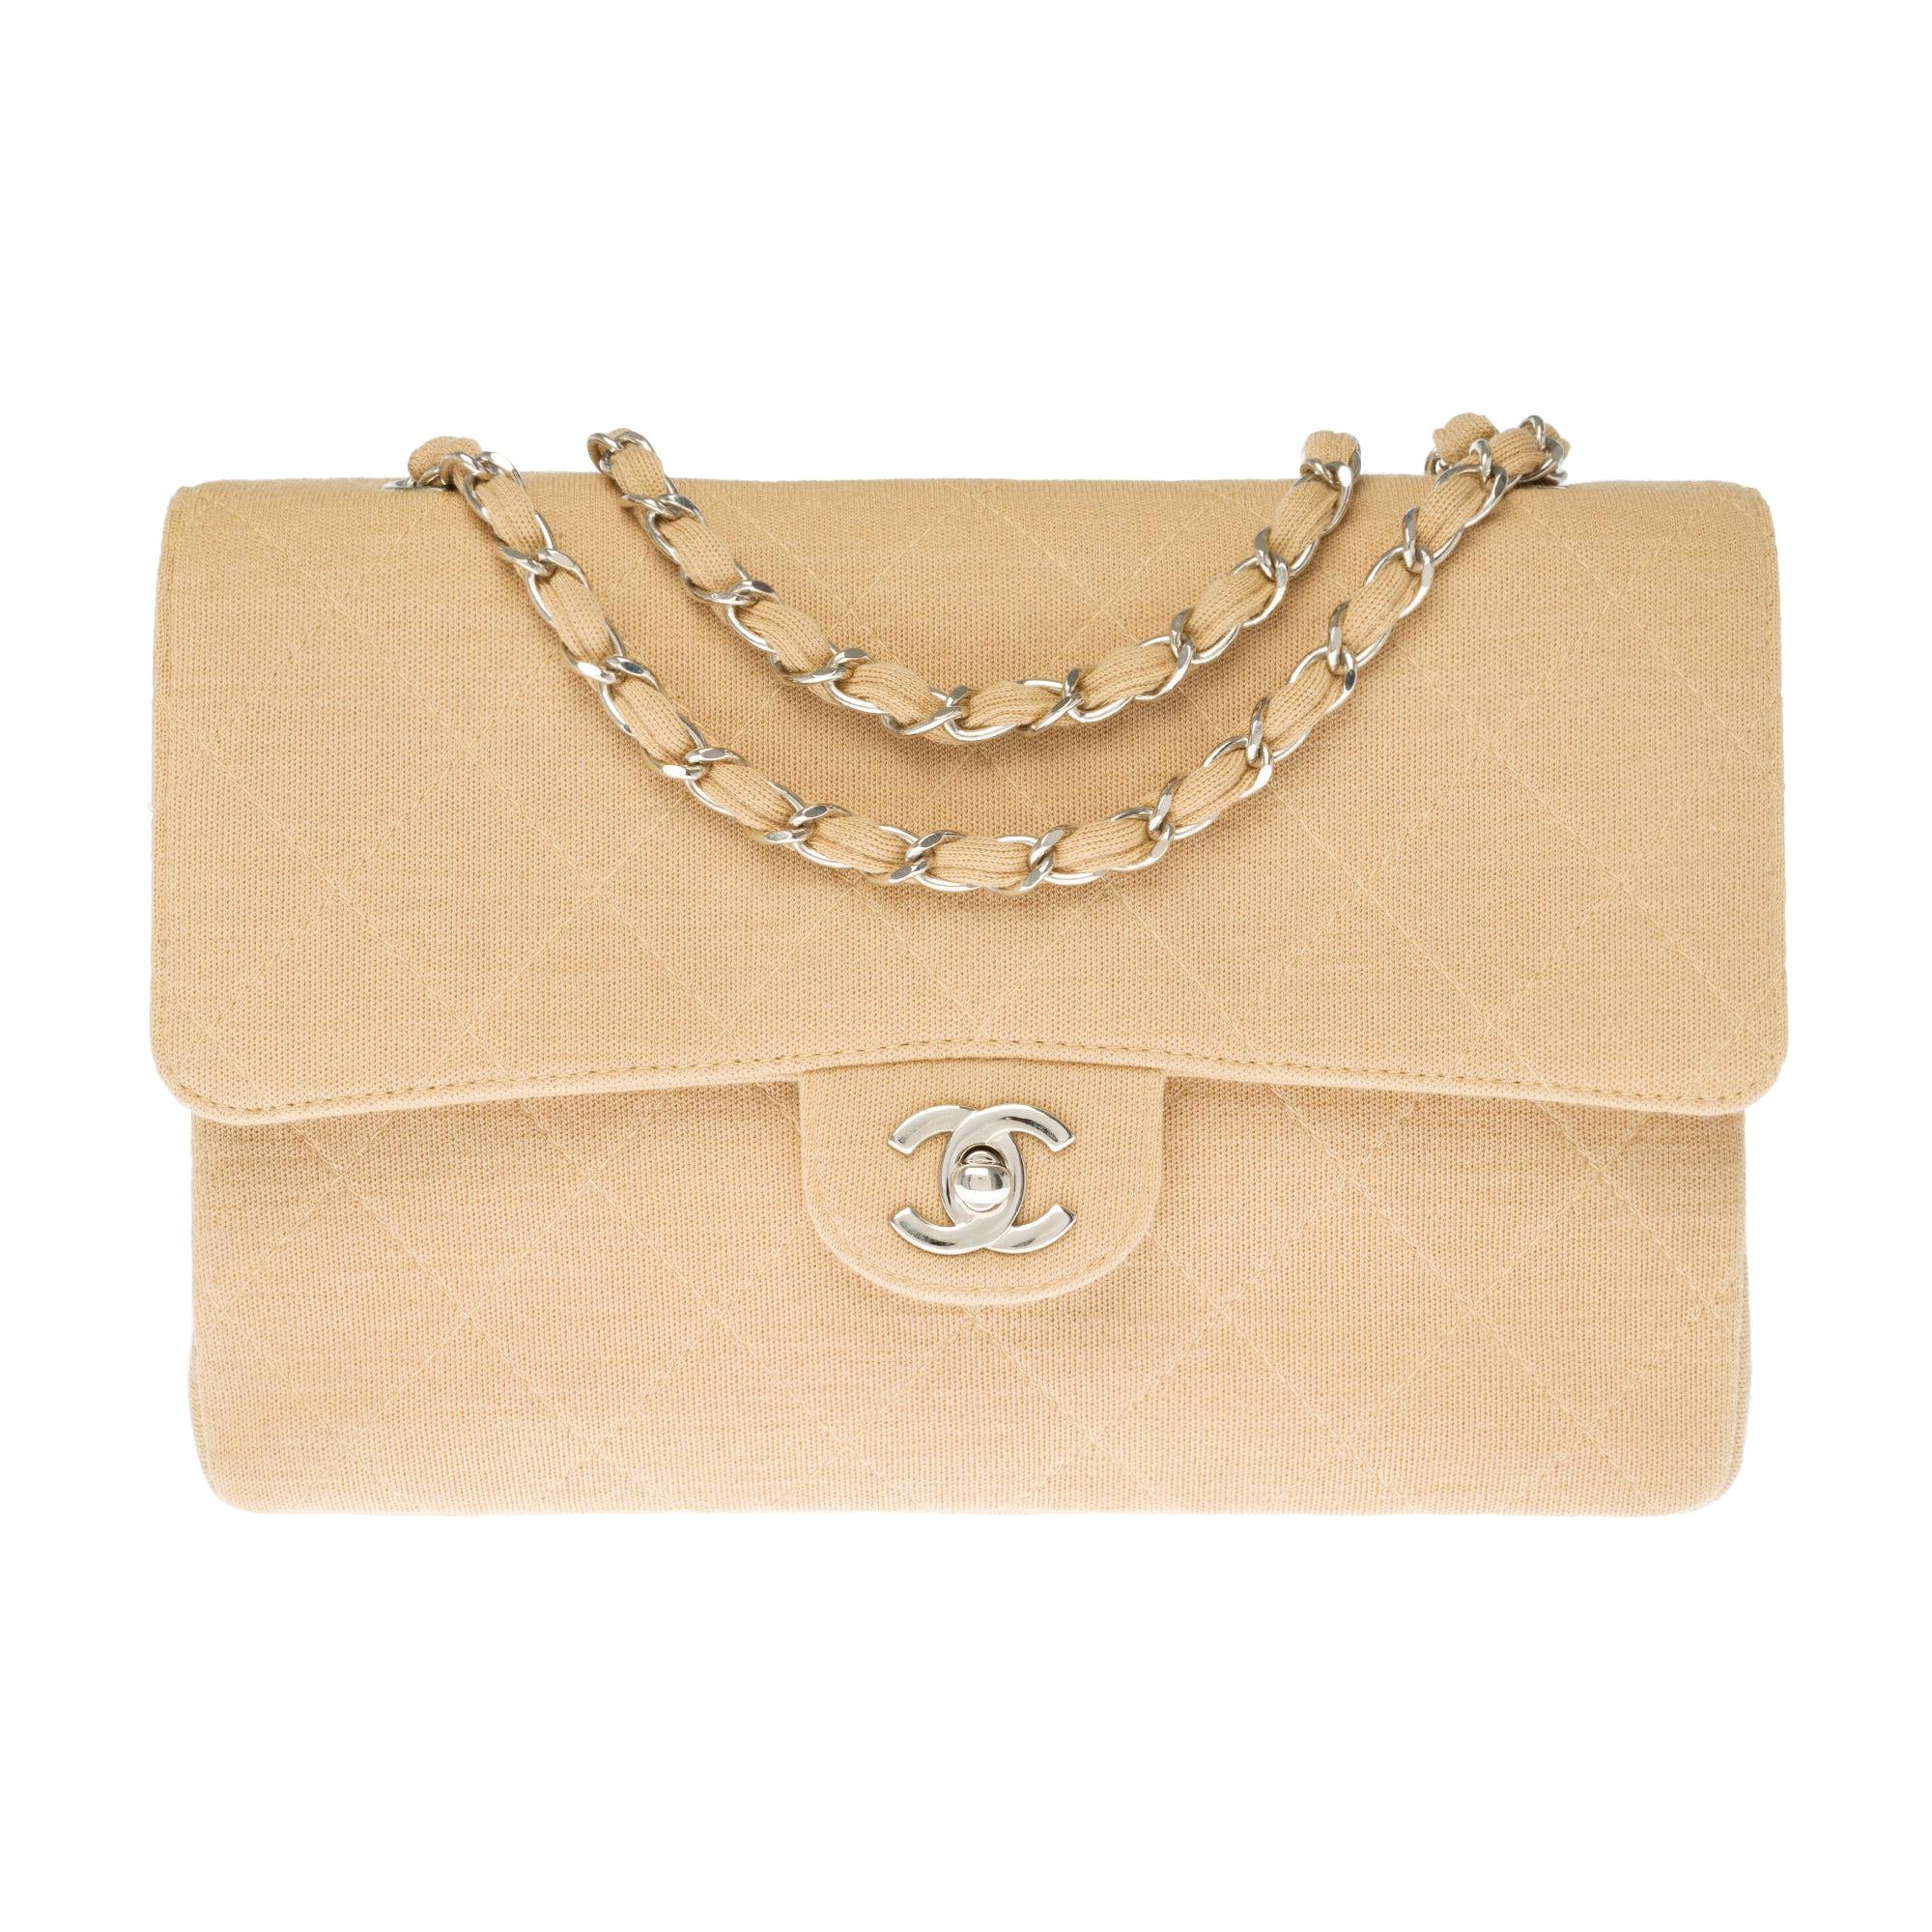 Chanel Timeless shoulder bag in beige quilted jersey with silver hardware